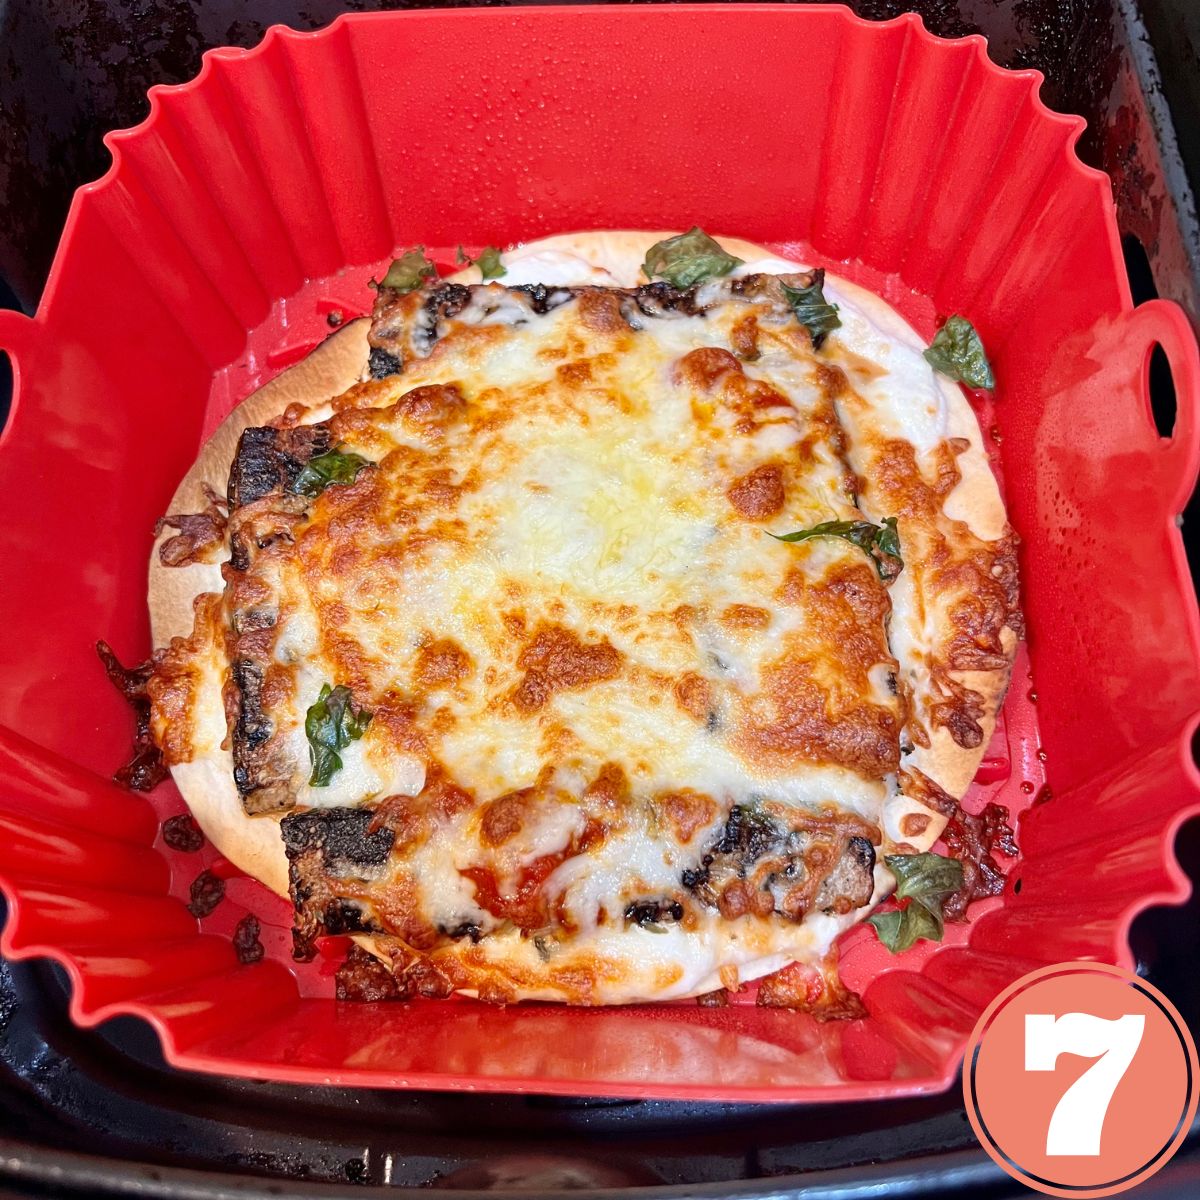 A crispy veggie air fryer pizza in a red silicone basket